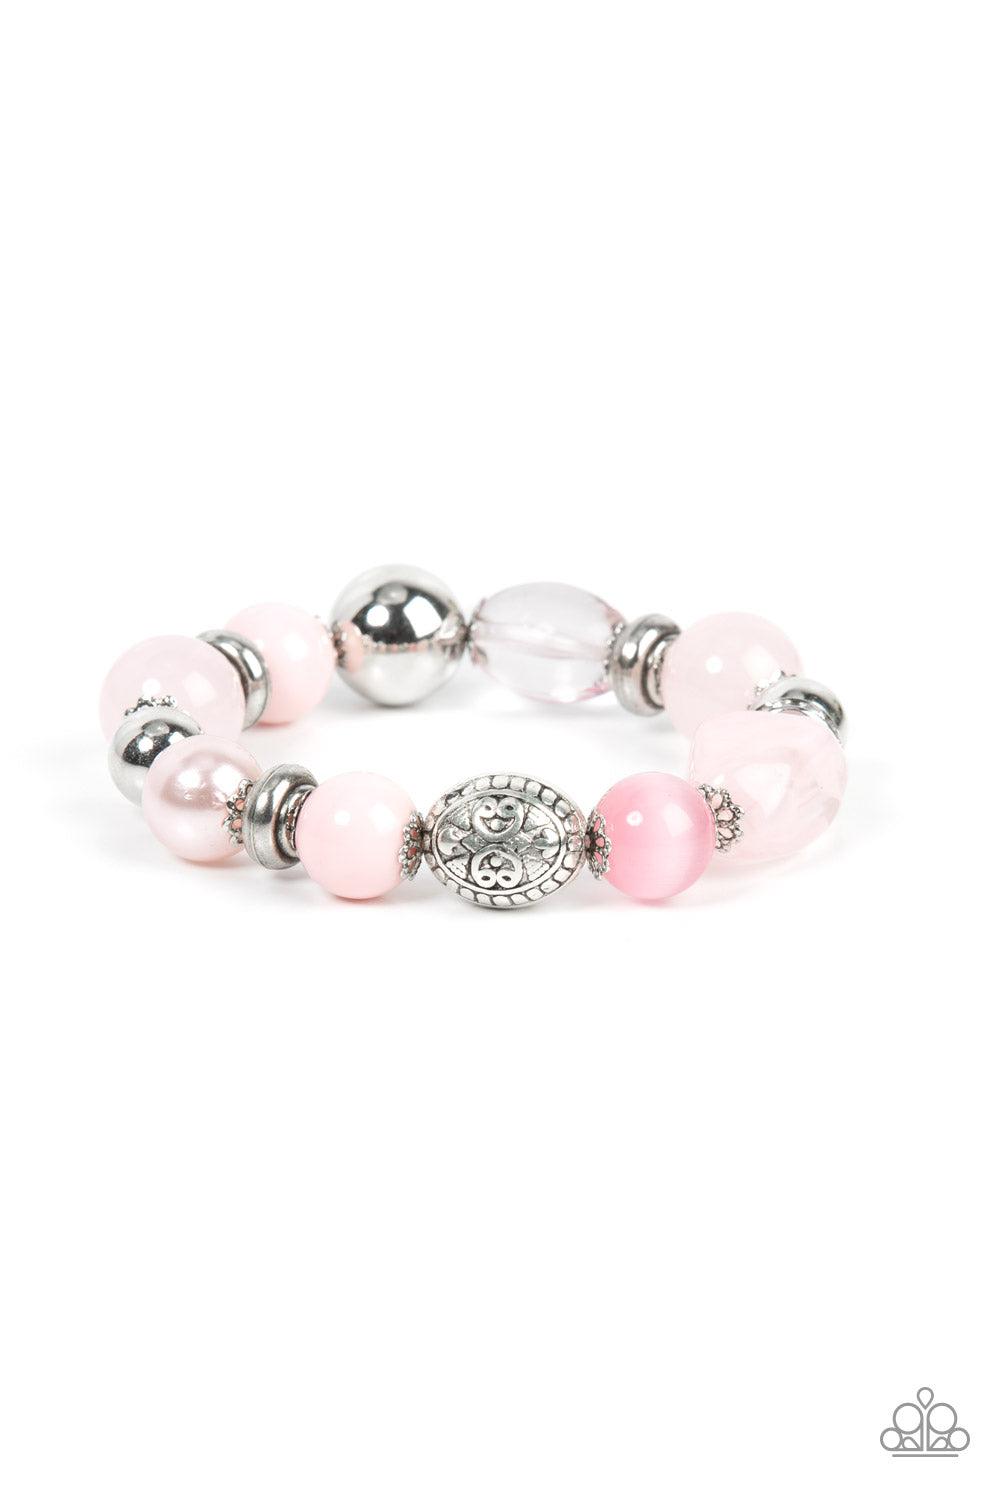 Tonal Takeover Pink Bracelet - Paparazzi Accessories- lightbox - CarasShop.com - $5 Jewelry by Cara Jewels